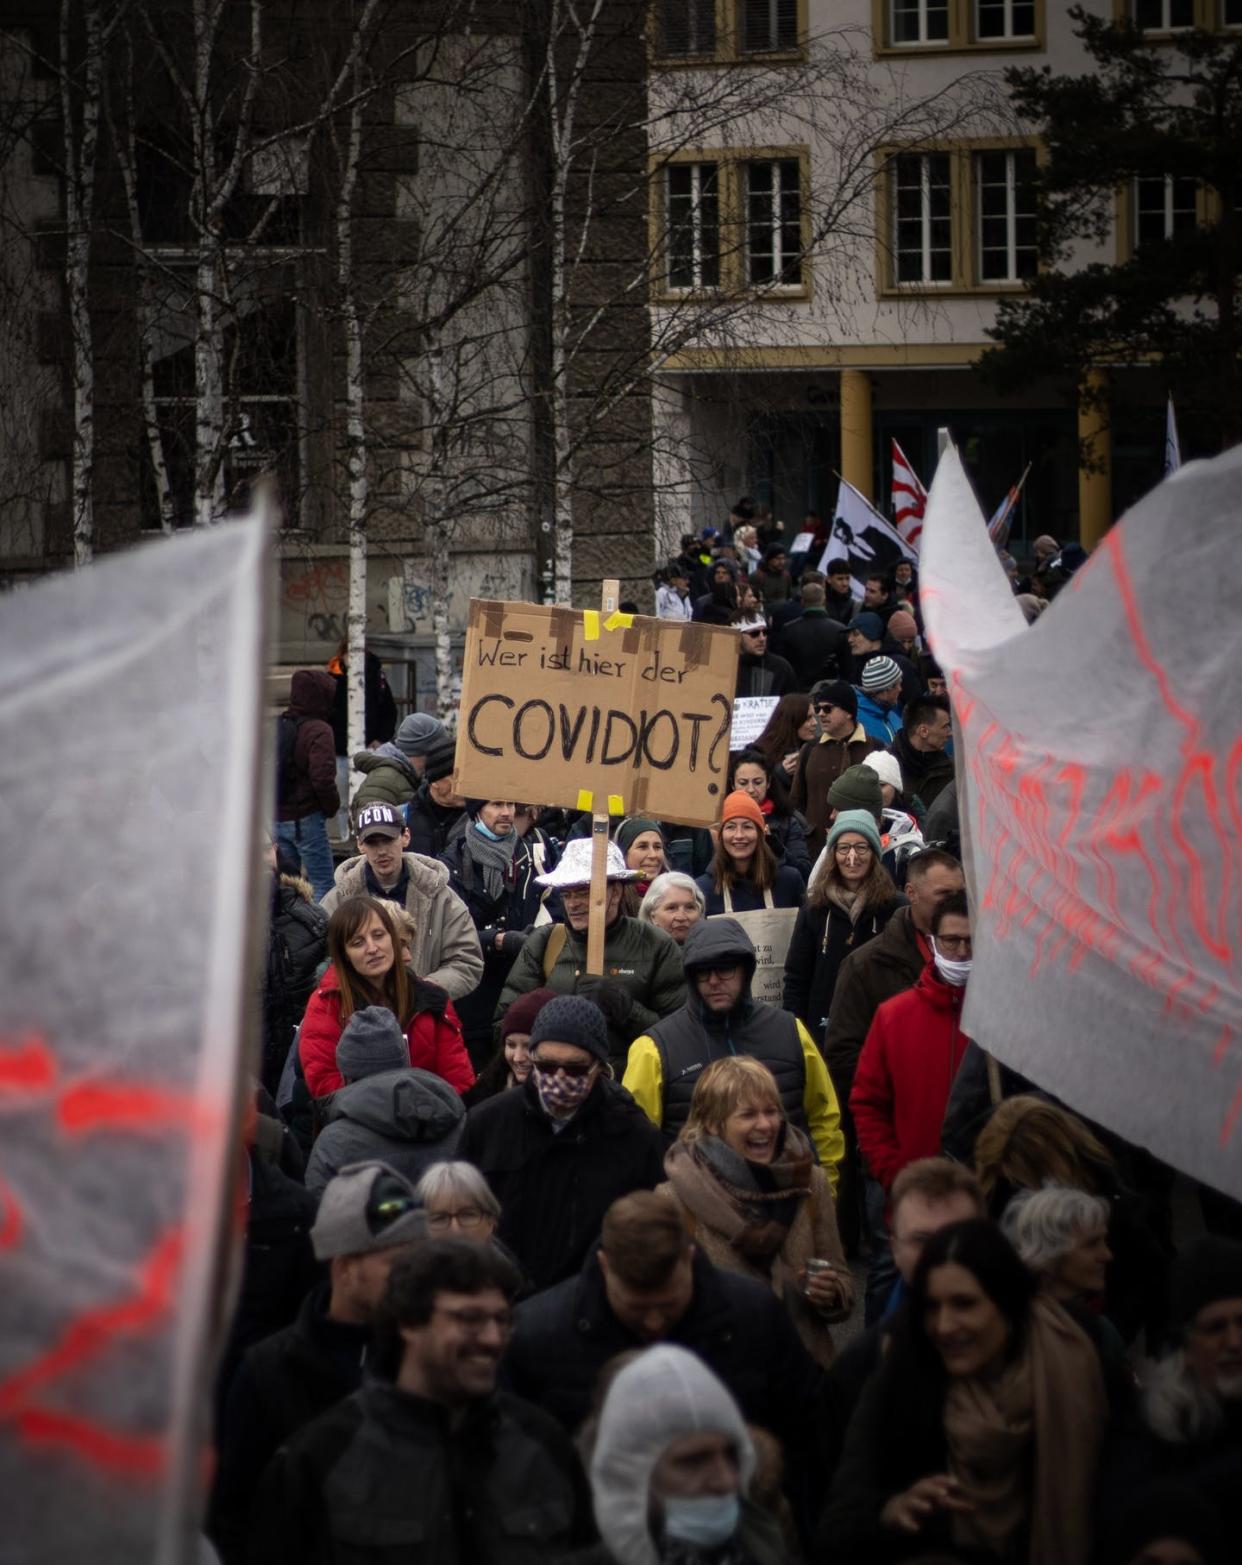 <span class="caption">Man holds sign reading 'wer ist hier der COVIDIOT' which means 'who is the COVIDIOT here?' at a protest against pandemic restrictions in March, 2021. </span> <span class="attribution"><span class="source">(Kajetan Sumila/Unsplash)</span></span>